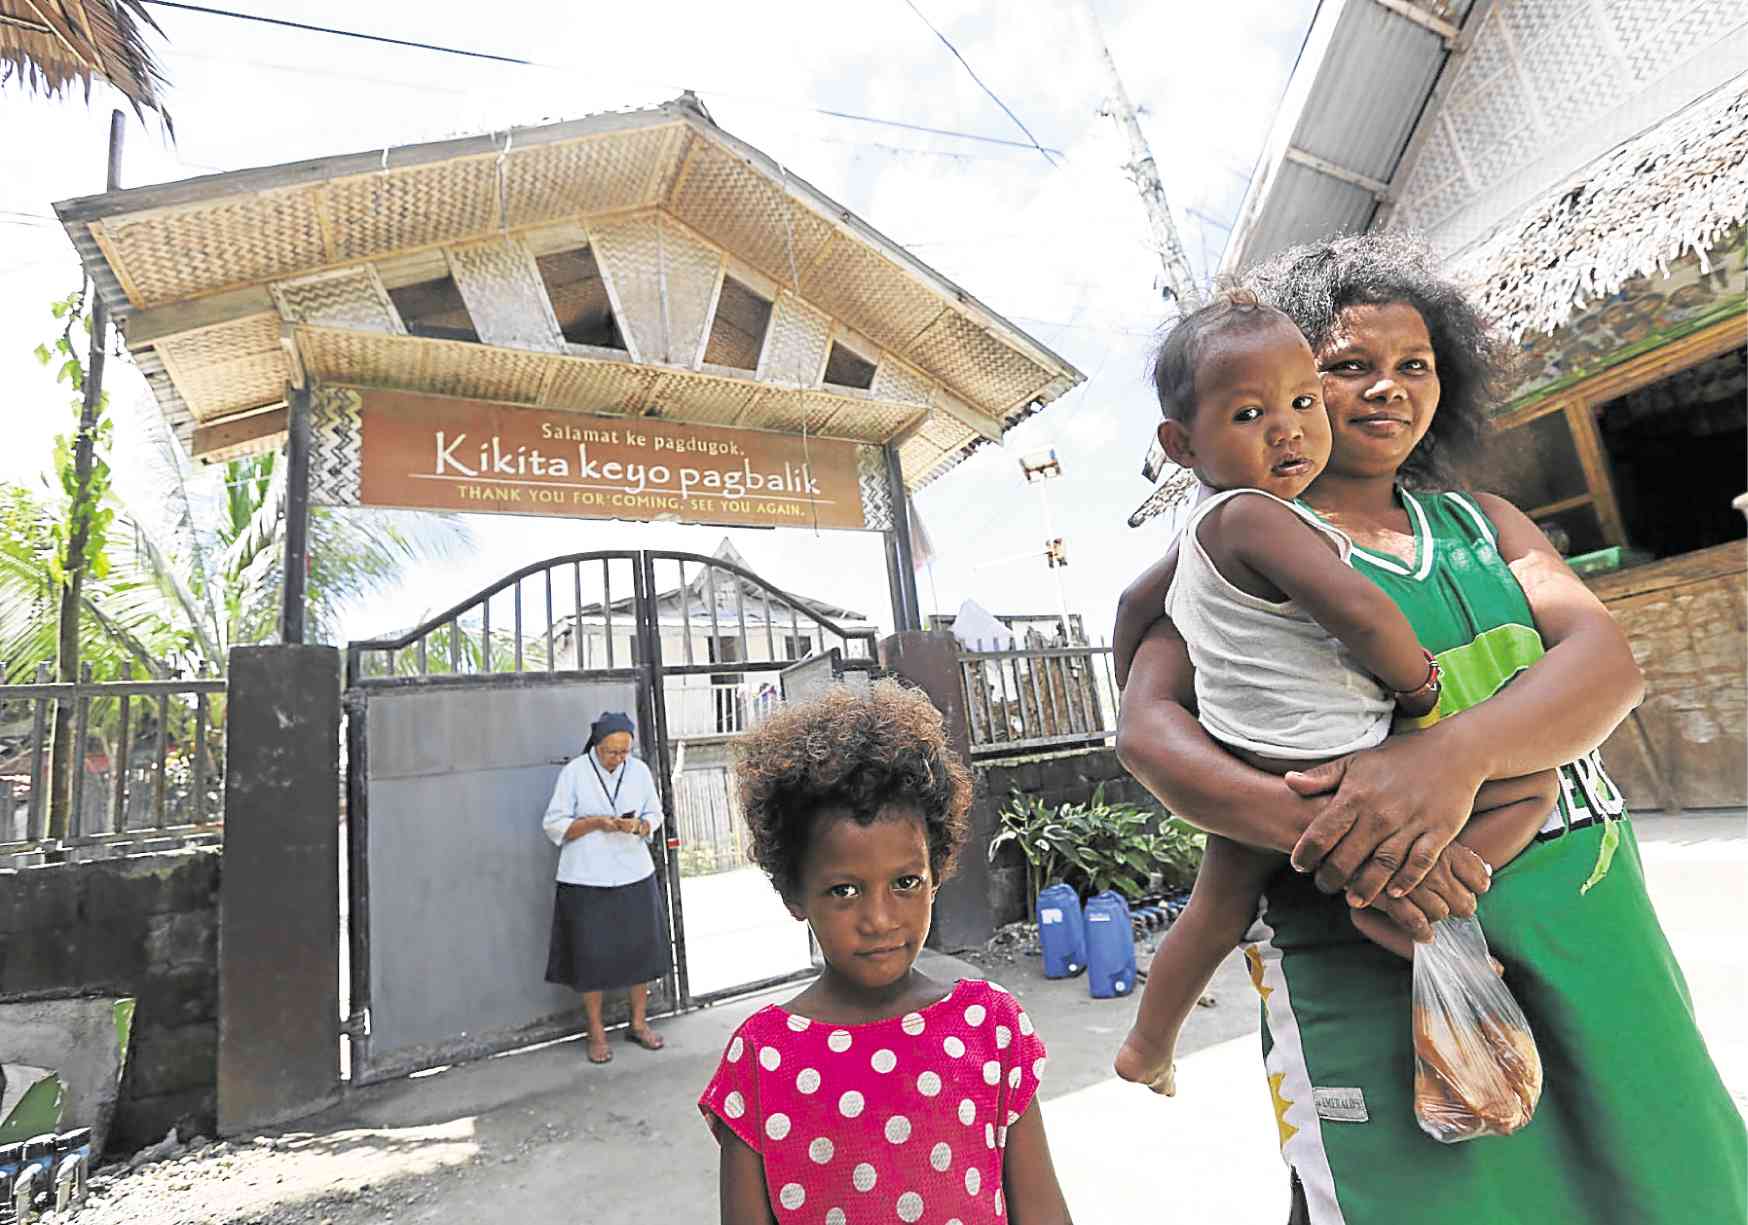 ati families face forced eviction in disputed boracay land